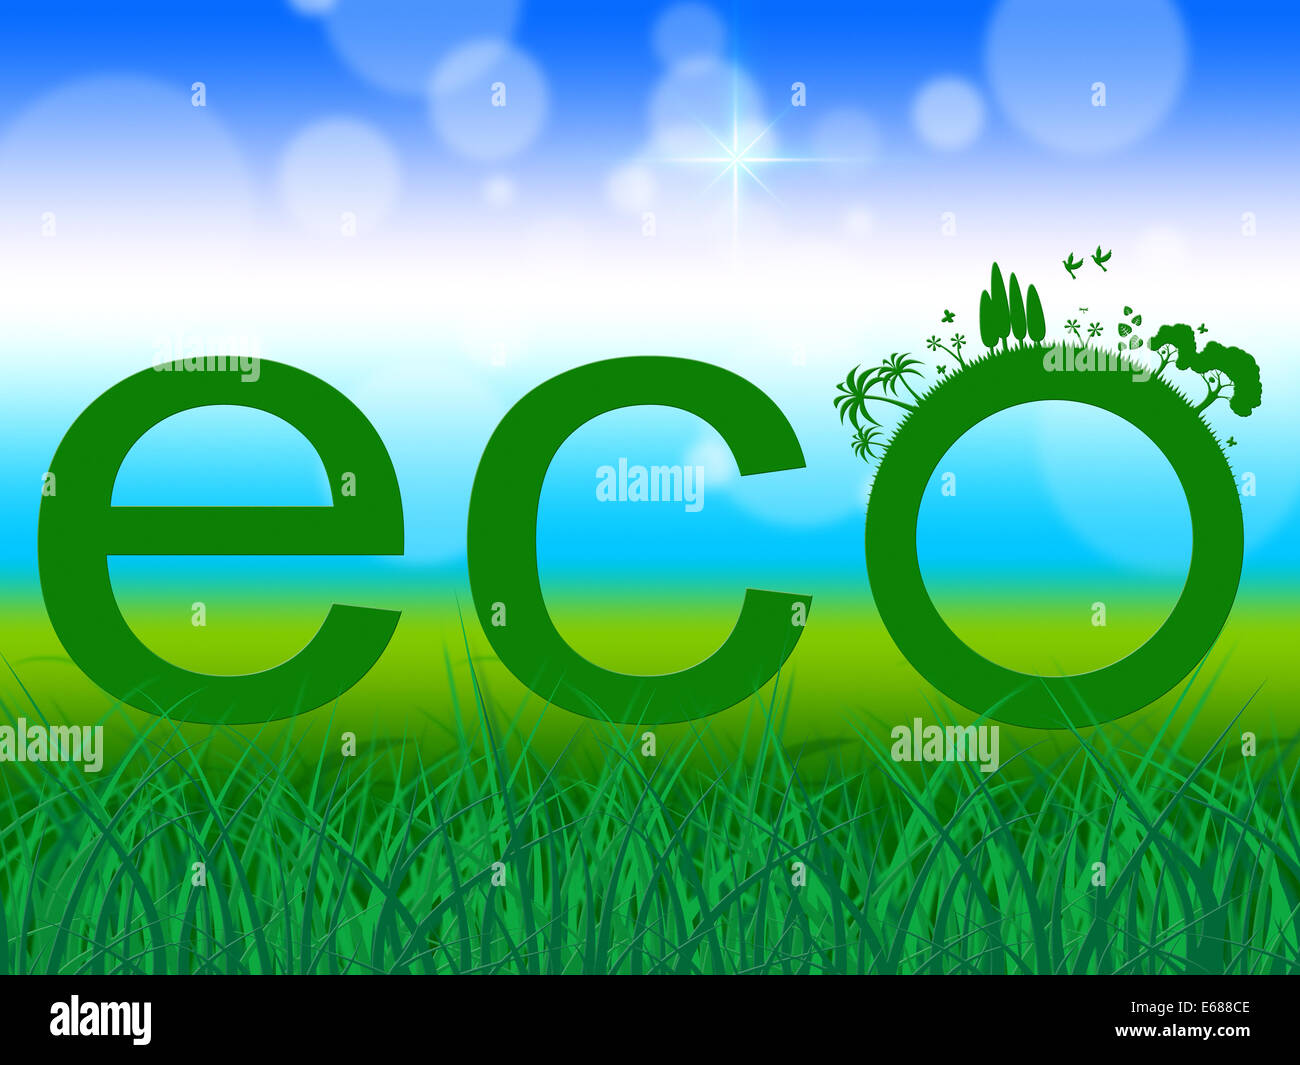 What does 'eco-friendly' actually mean?